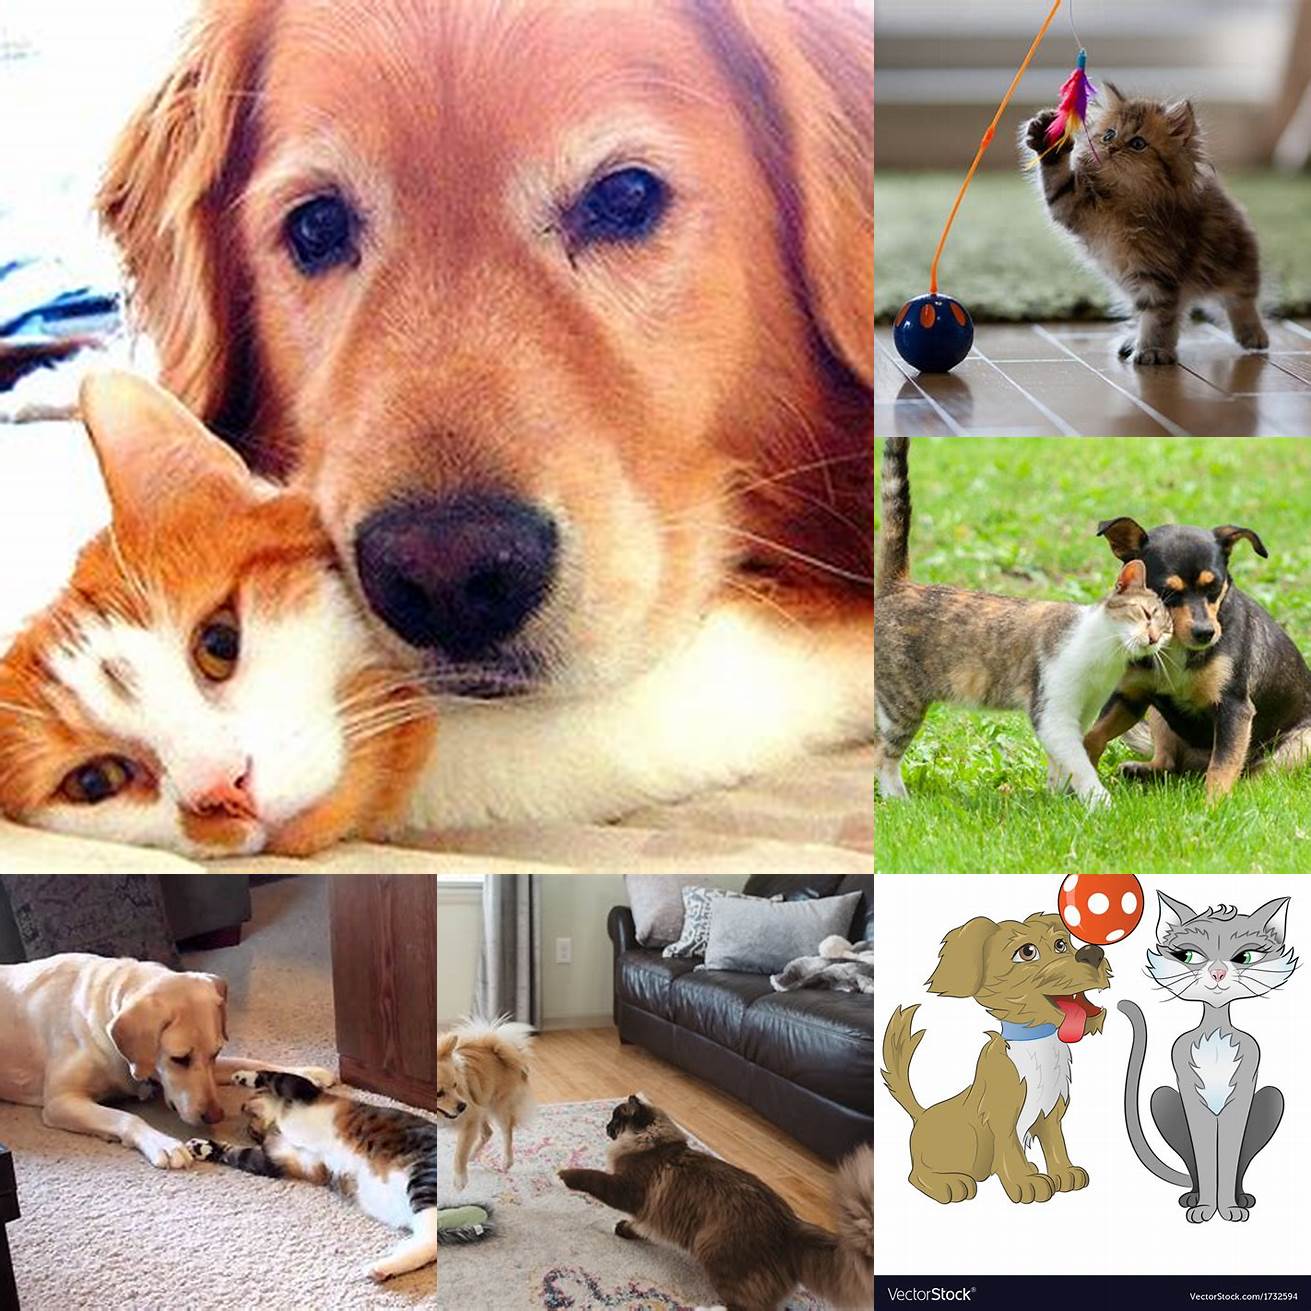 Image Idea 5 A Dog and a Cat Playing with a Toy Together